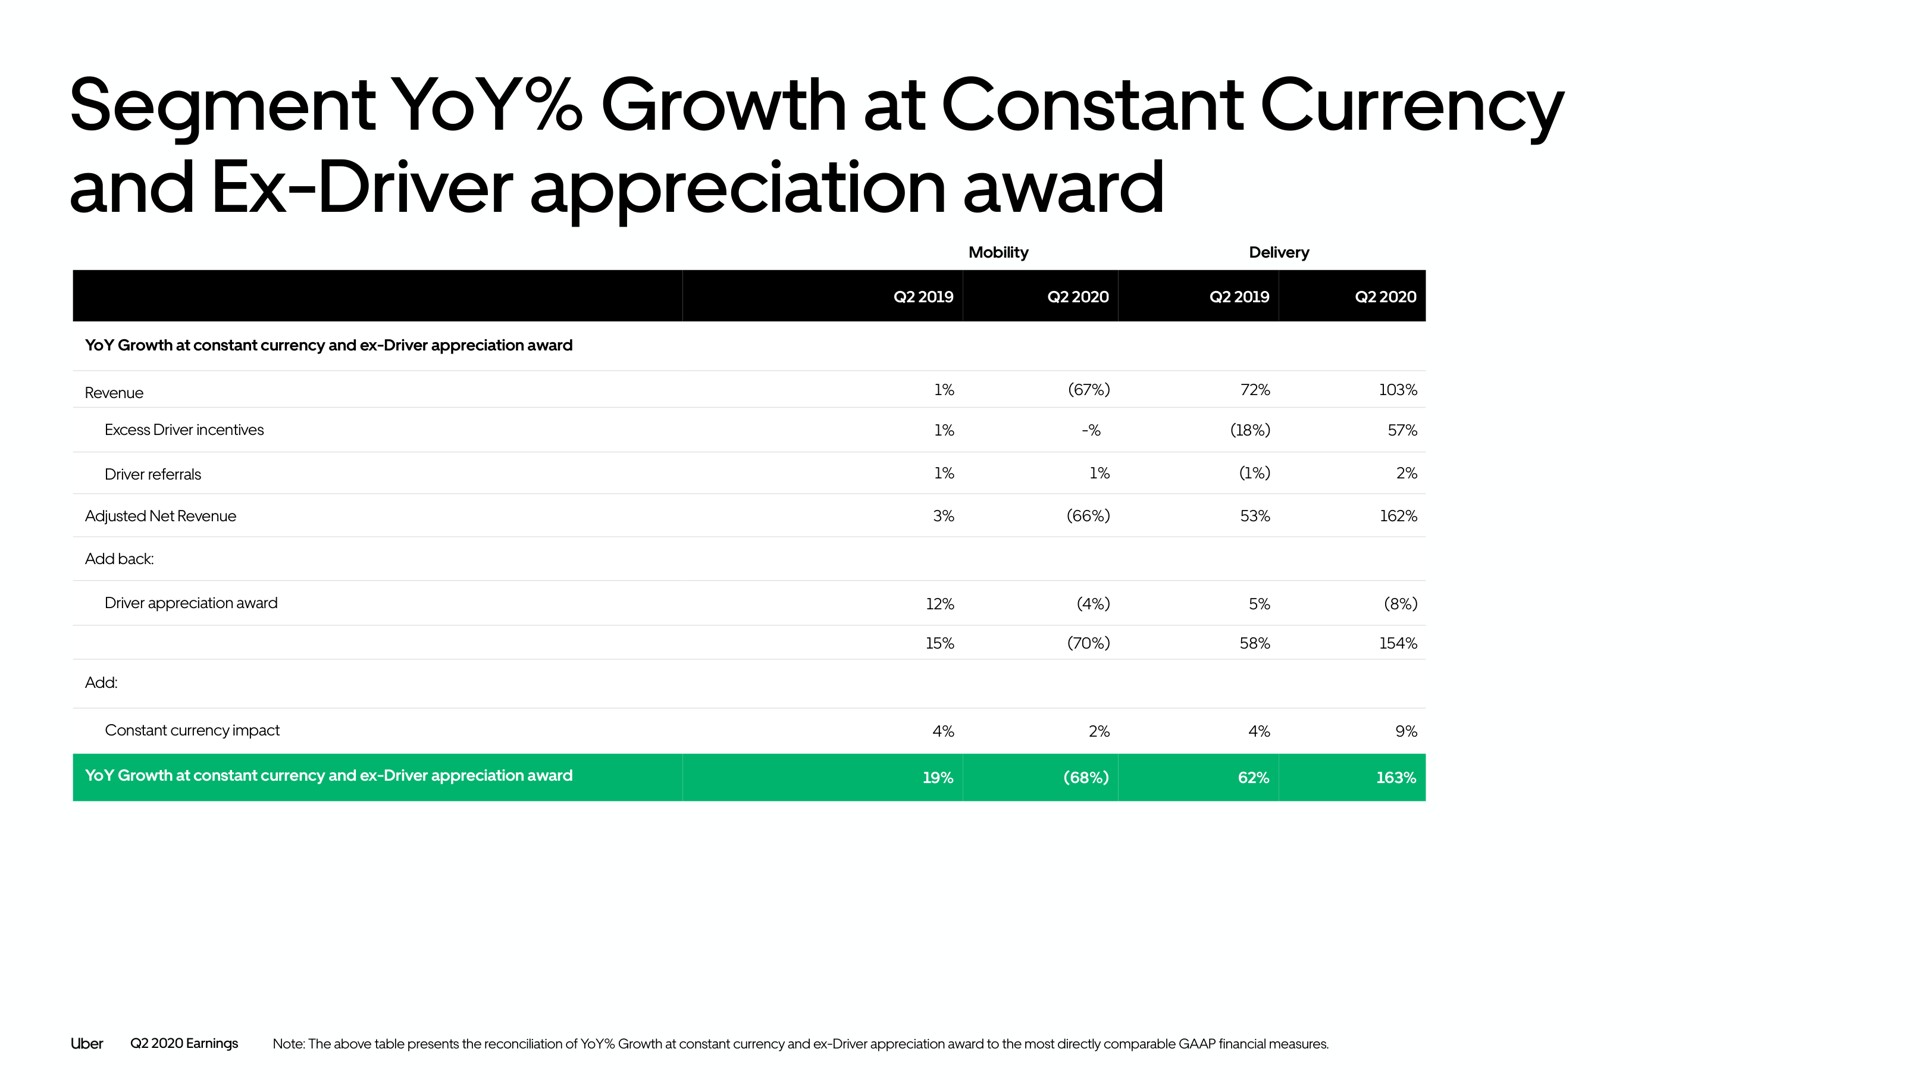 segment yoy growth at constant currency and driver appreciation award | Uber